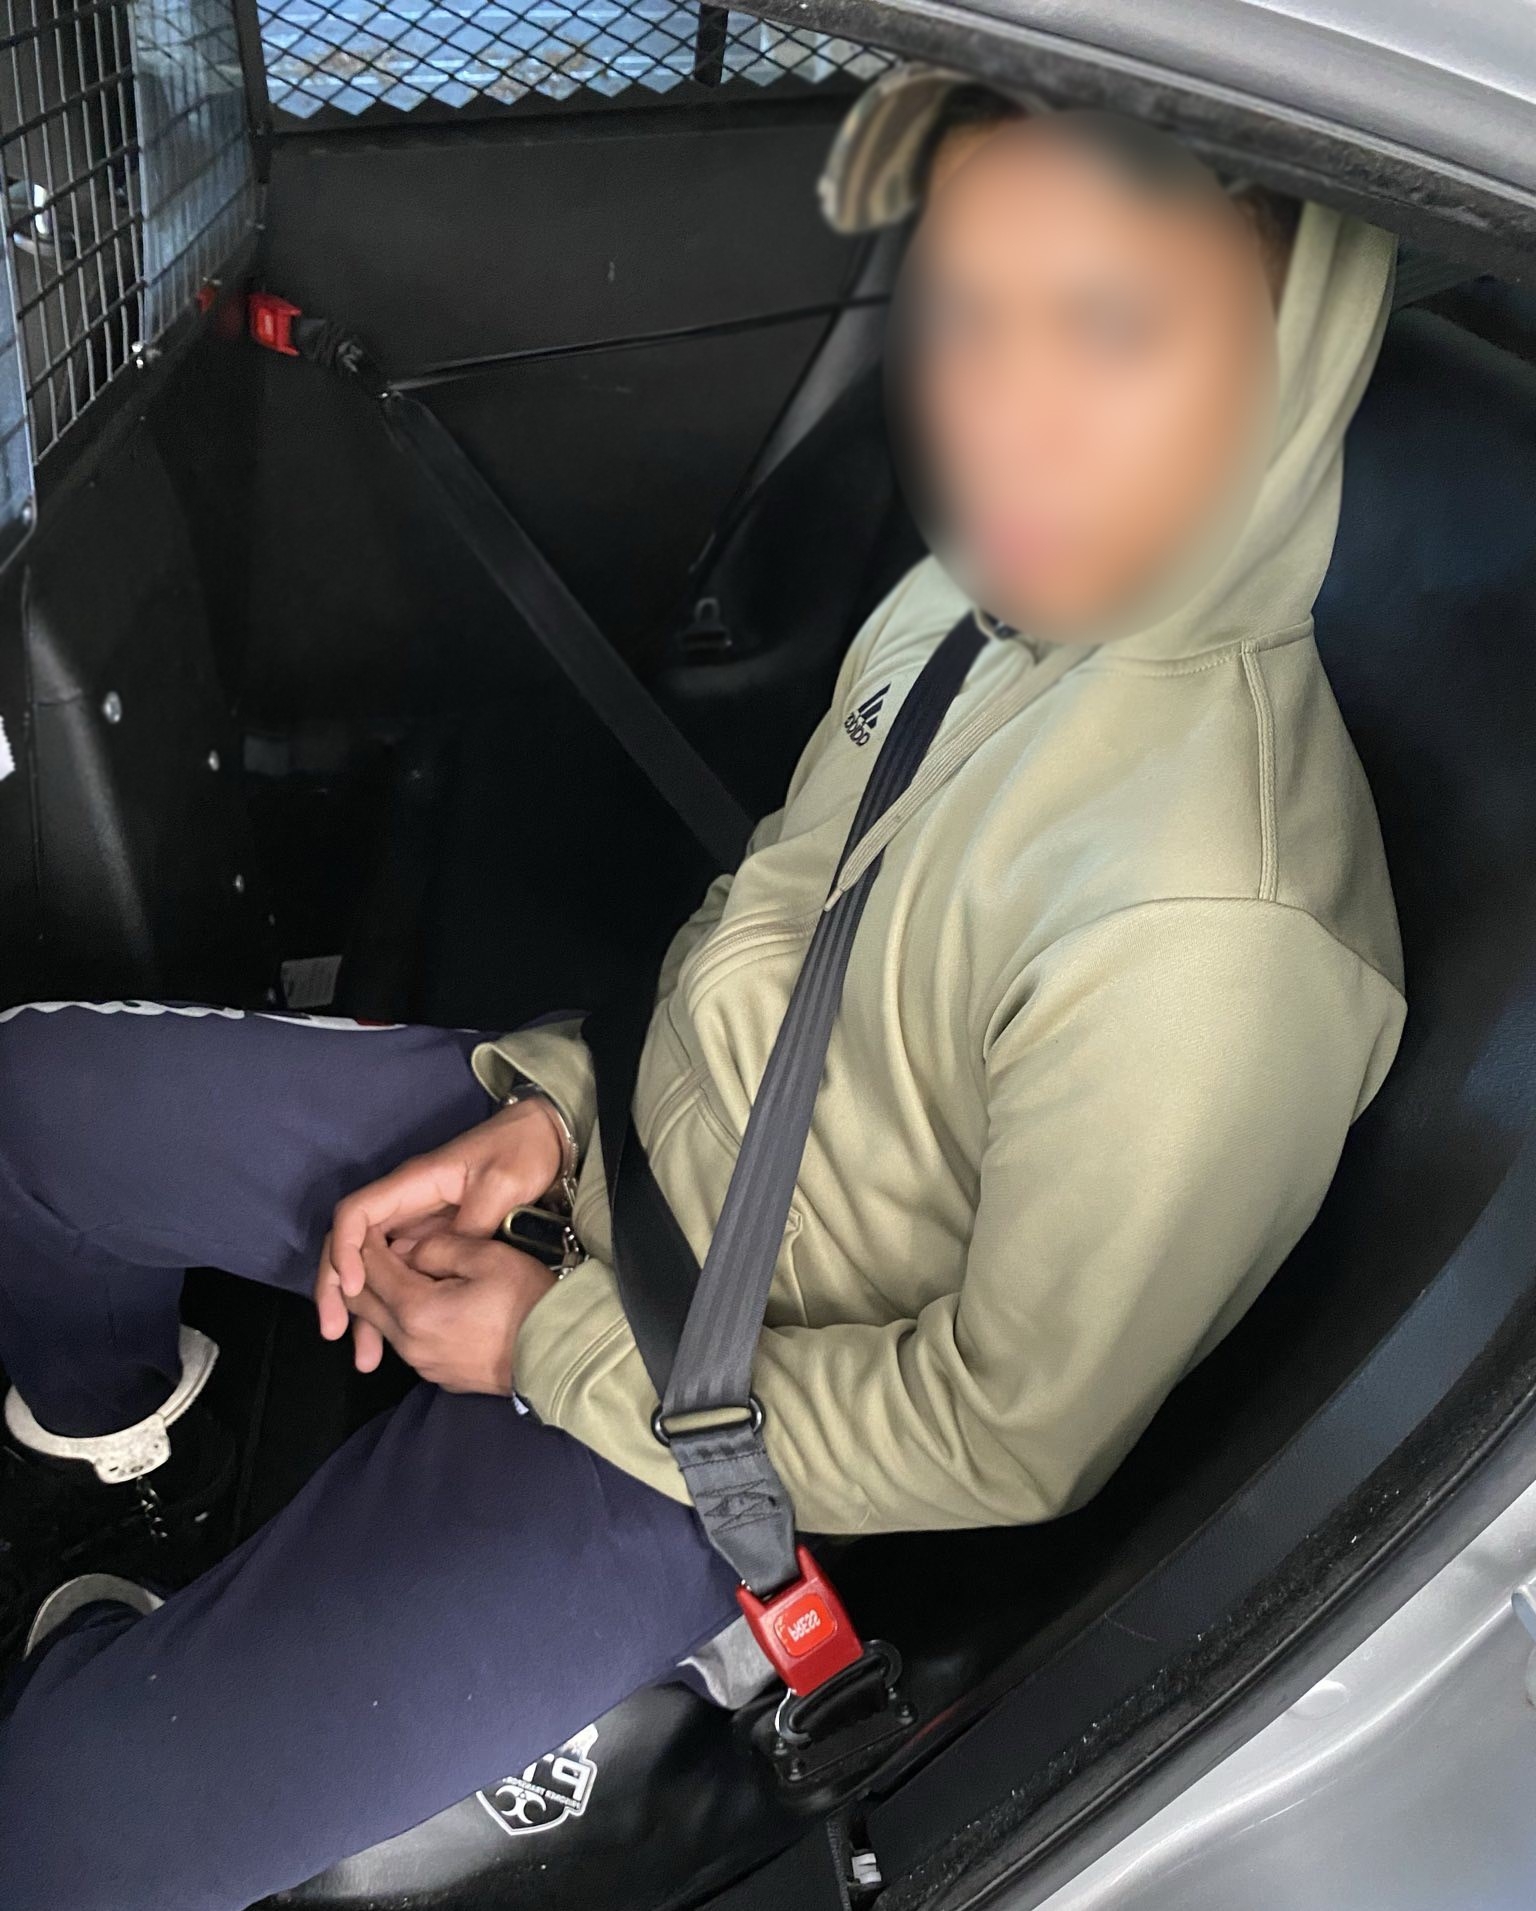 Handcuffed individual in back of car with face blurred